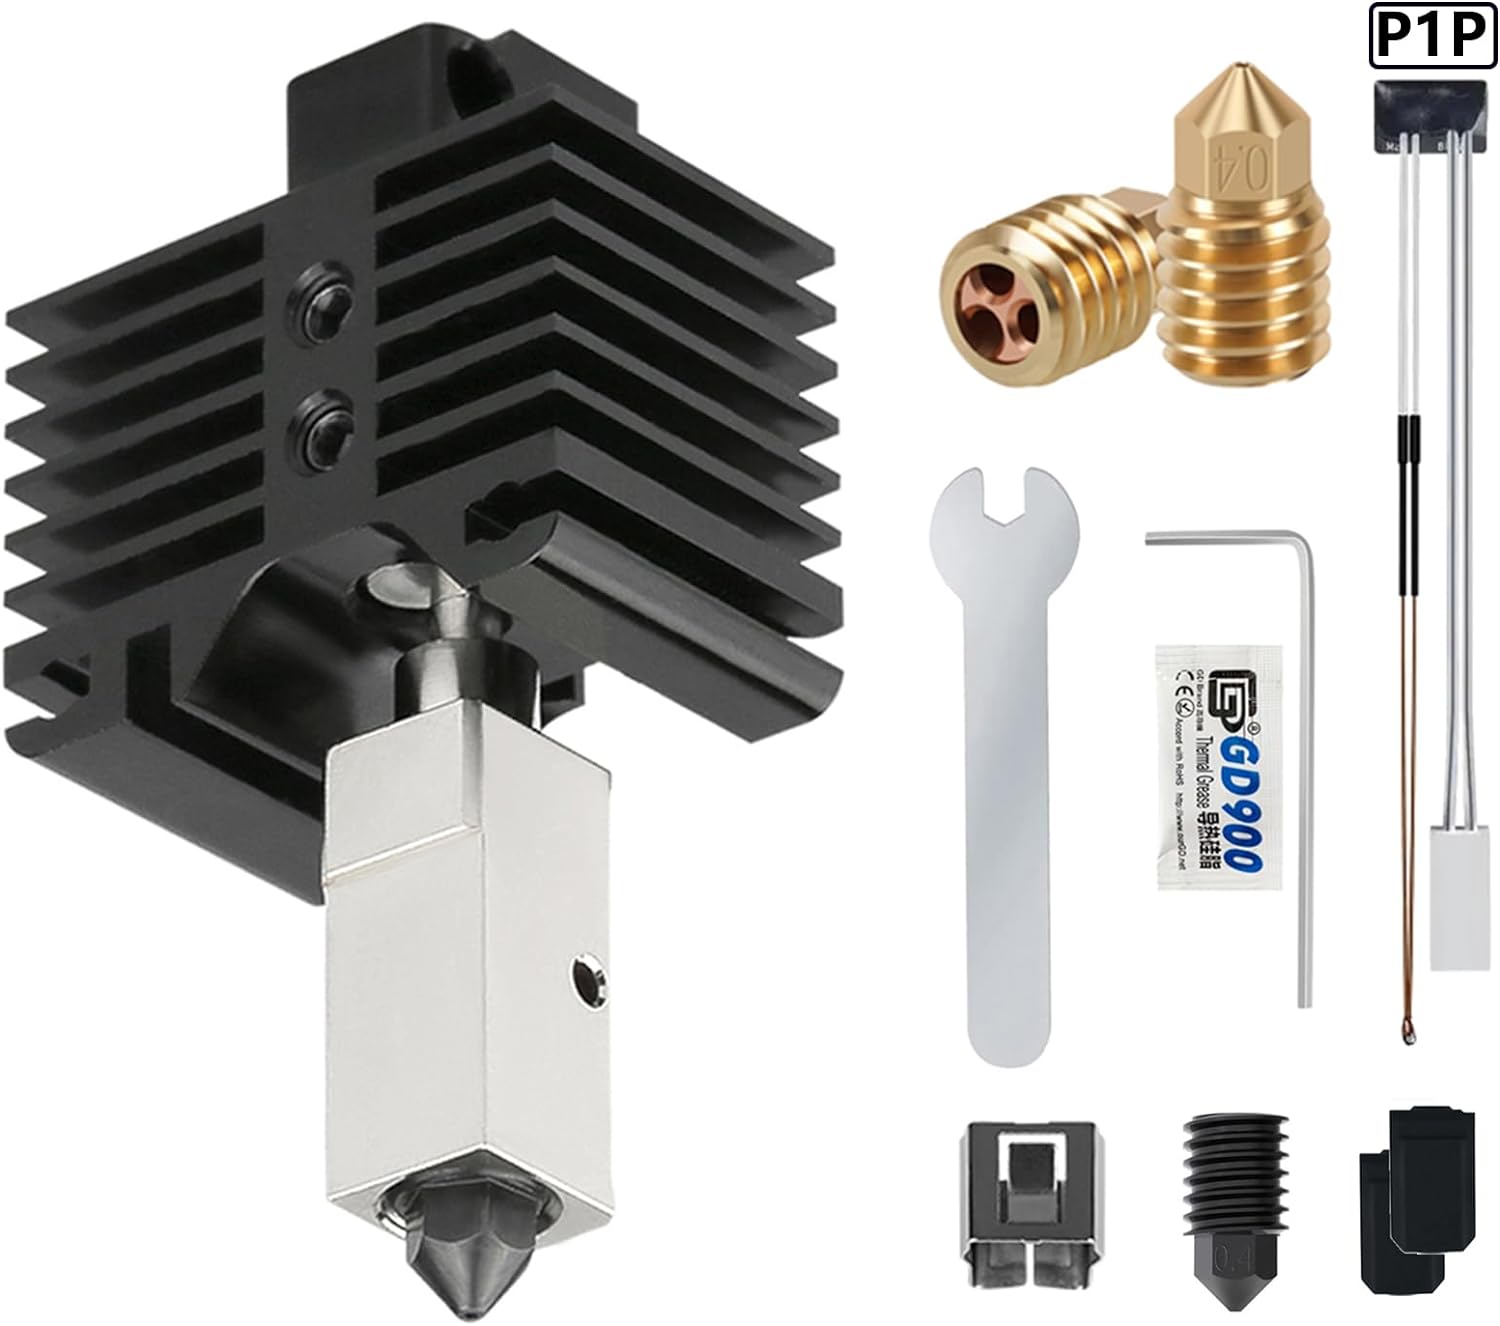 Upgraded Hotend for Bambu Lab P1S P1P Review